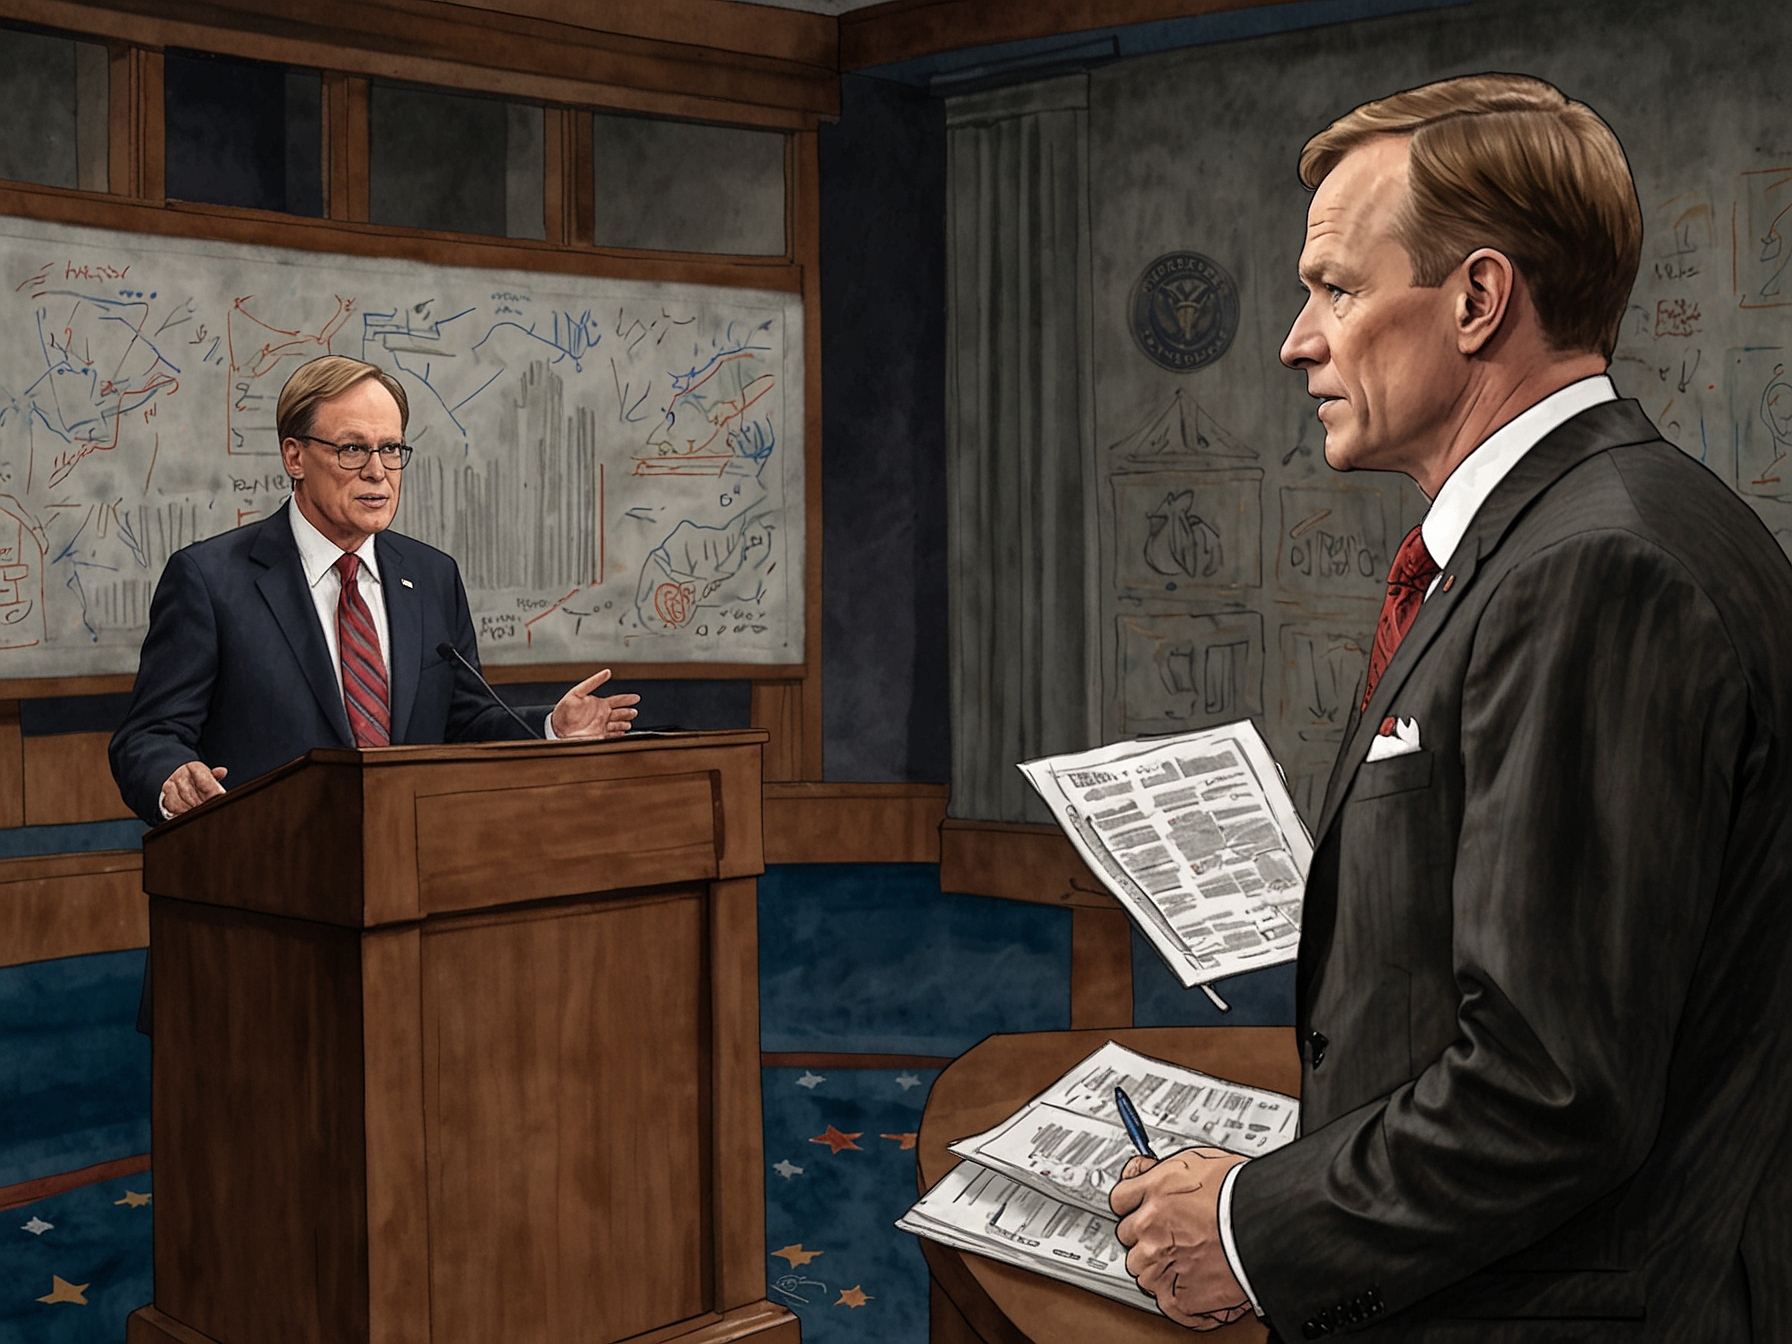 John Dickerson delivering a post-debate analysis on CBS News, highlighting the unique challenges and circumstances of the 2020 presidential campaign compared to 1968.